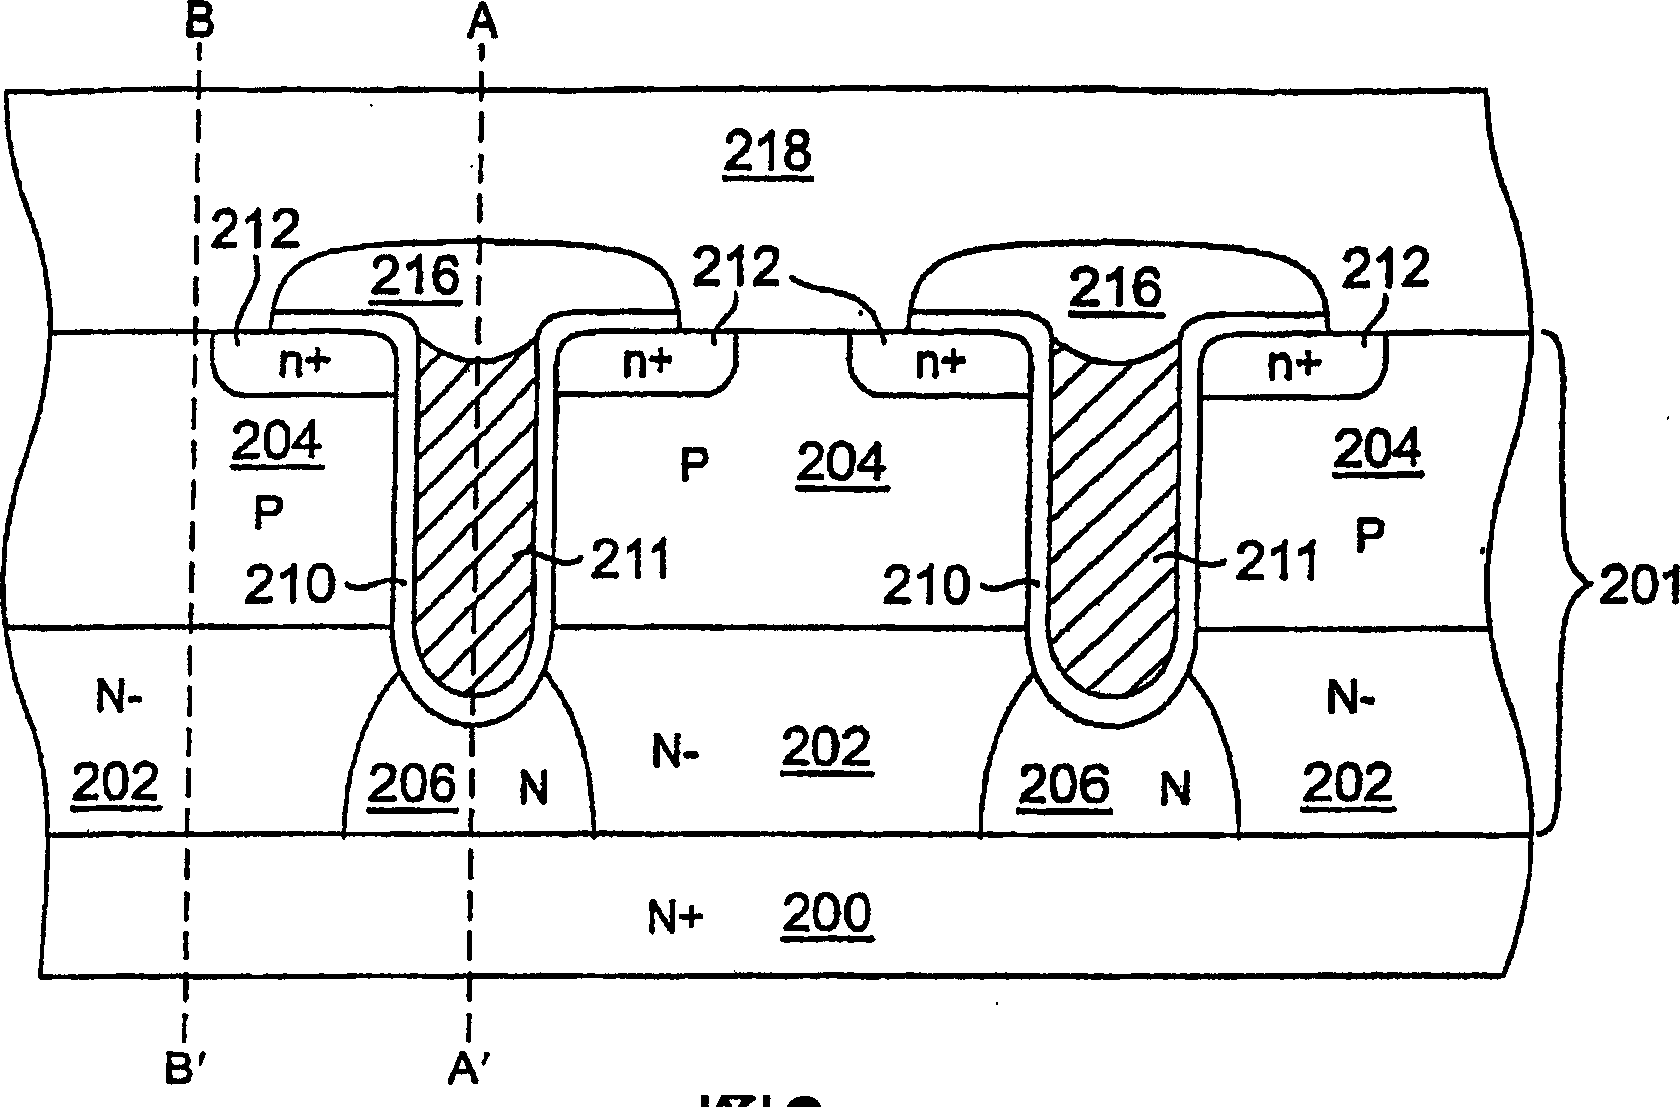 Trench MOSFET device with improved on-resistance